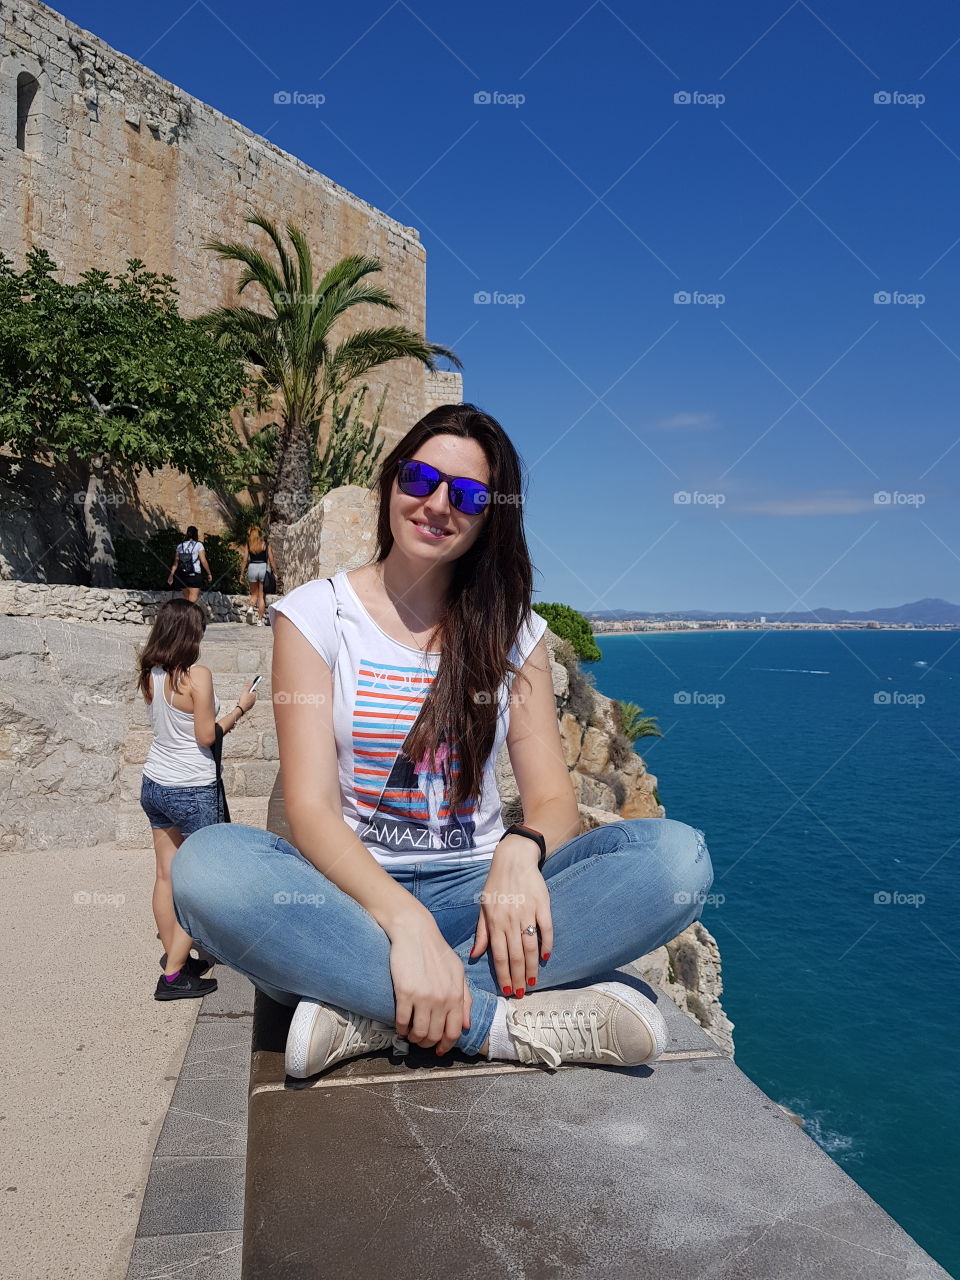 Woman, Travel, People, Girl, Outdoors